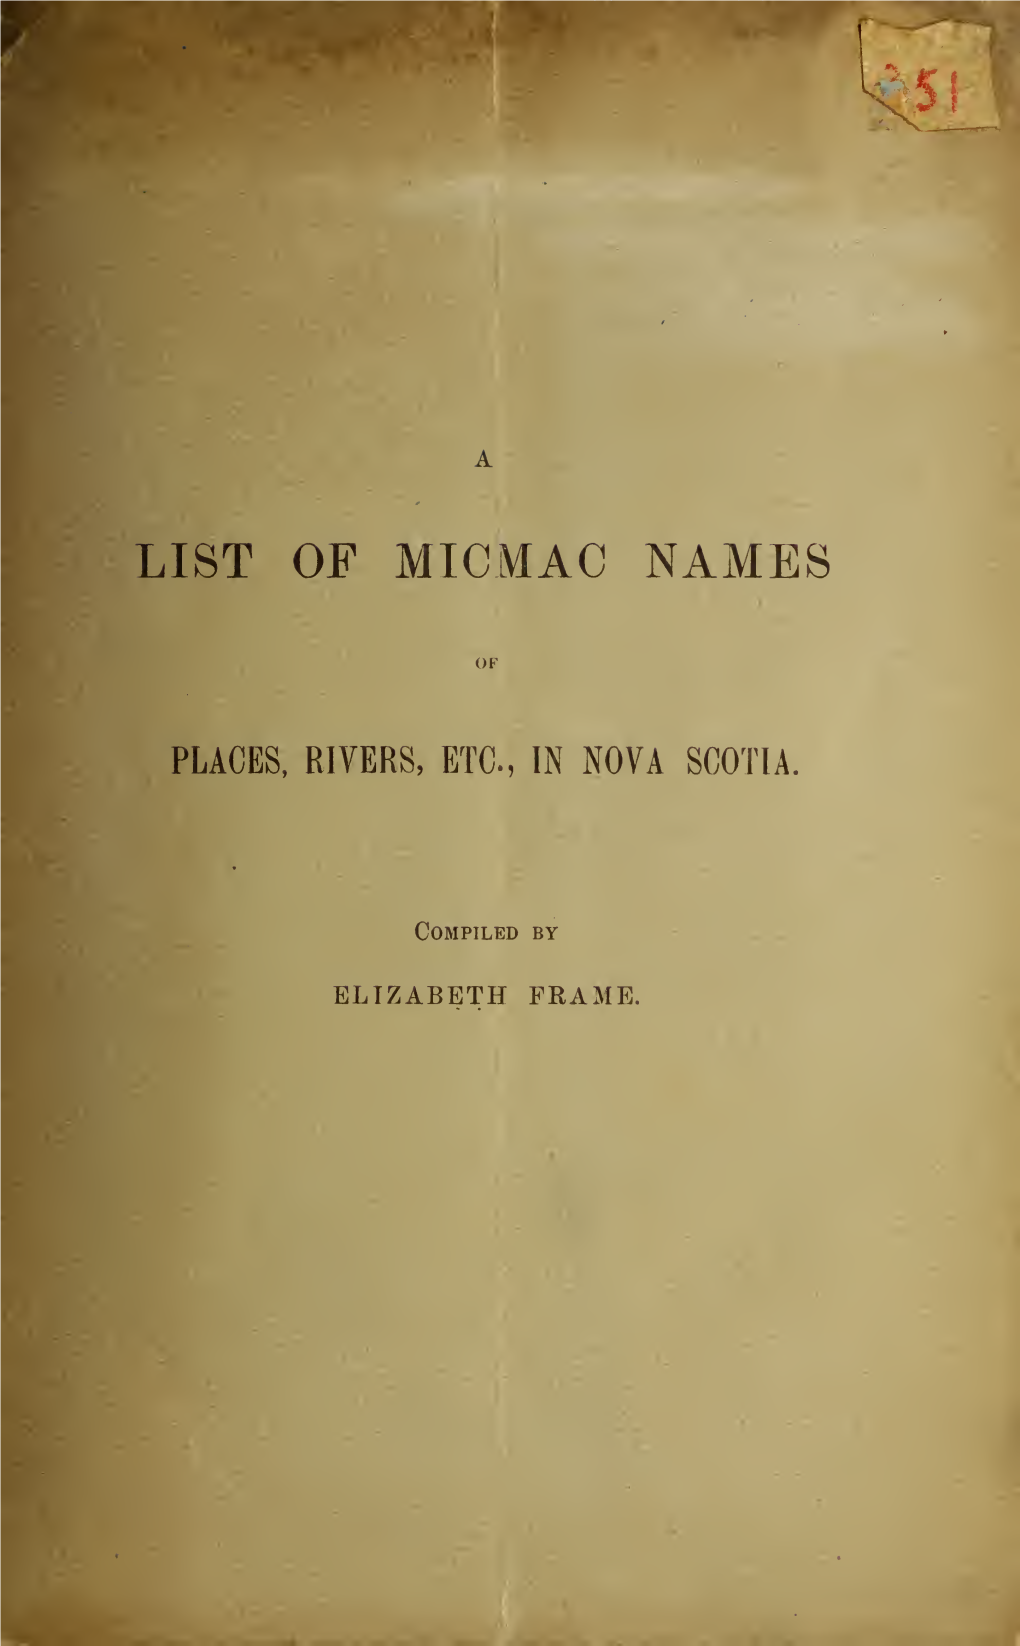 A List of Micmac Names of Places, Rivers, Etc., in Nova Scotia